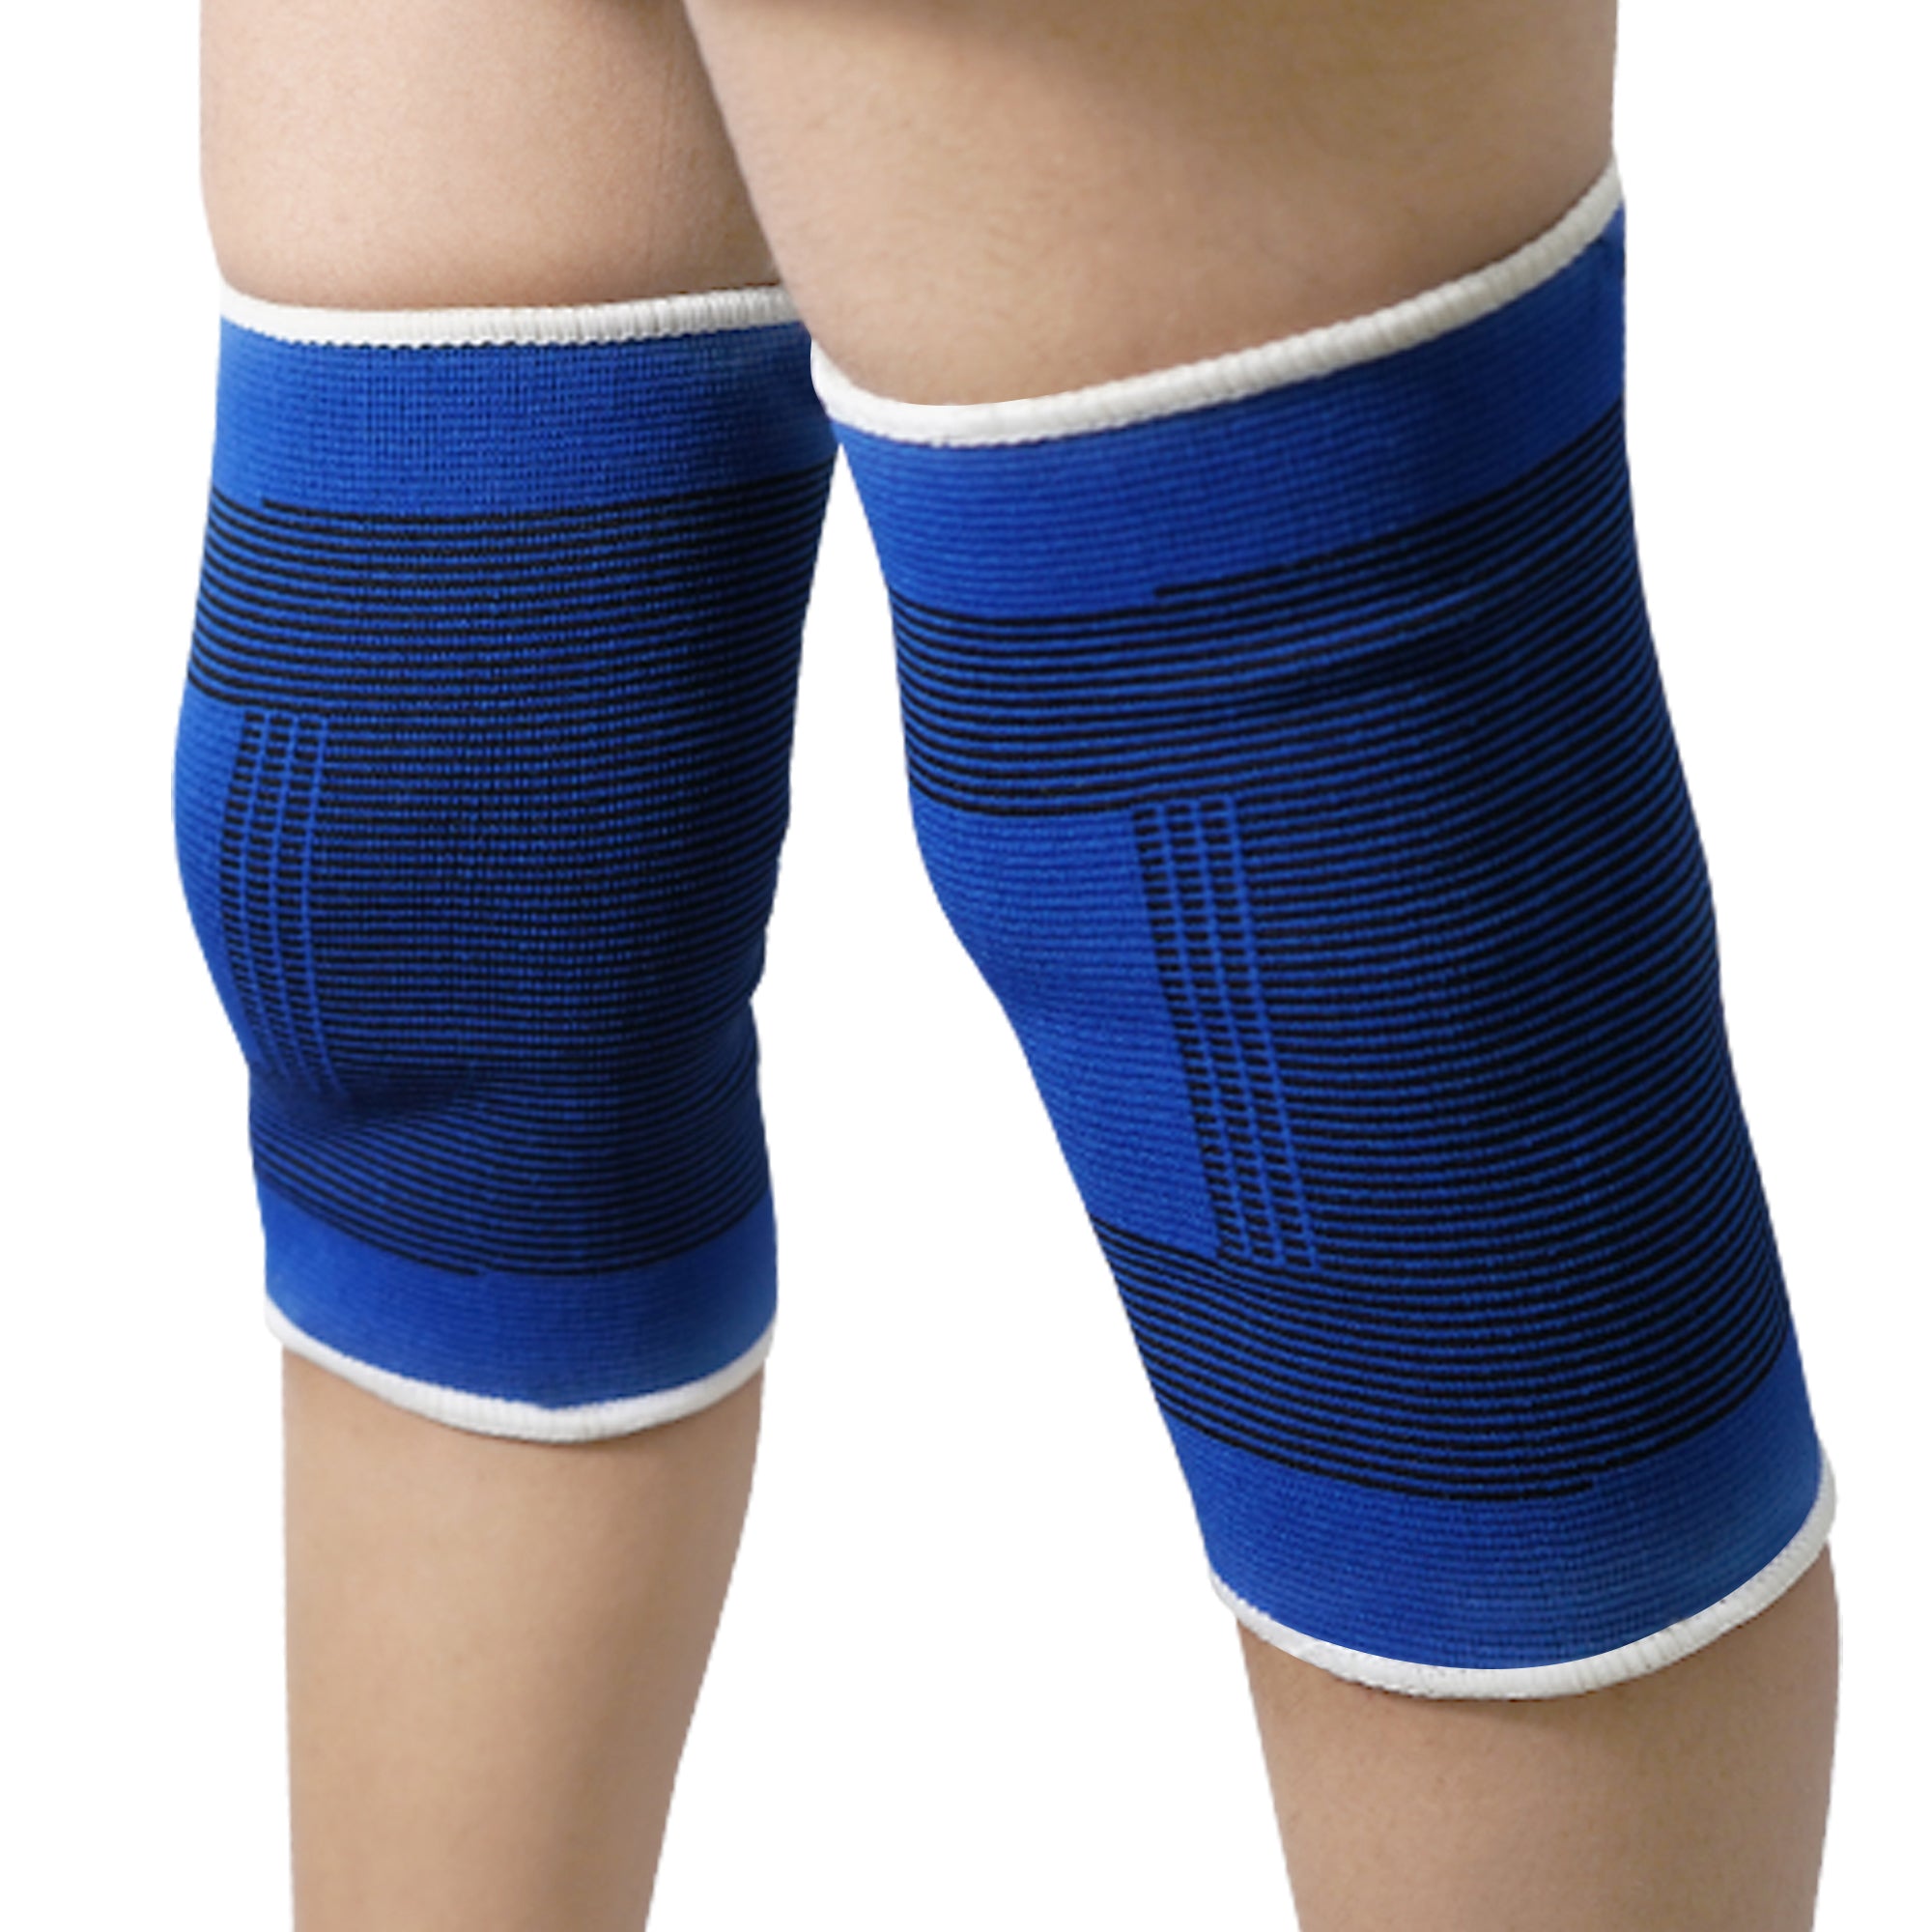 Manogyam Ankle, Elbow, Palm, Knee Support for Surgical and Sports